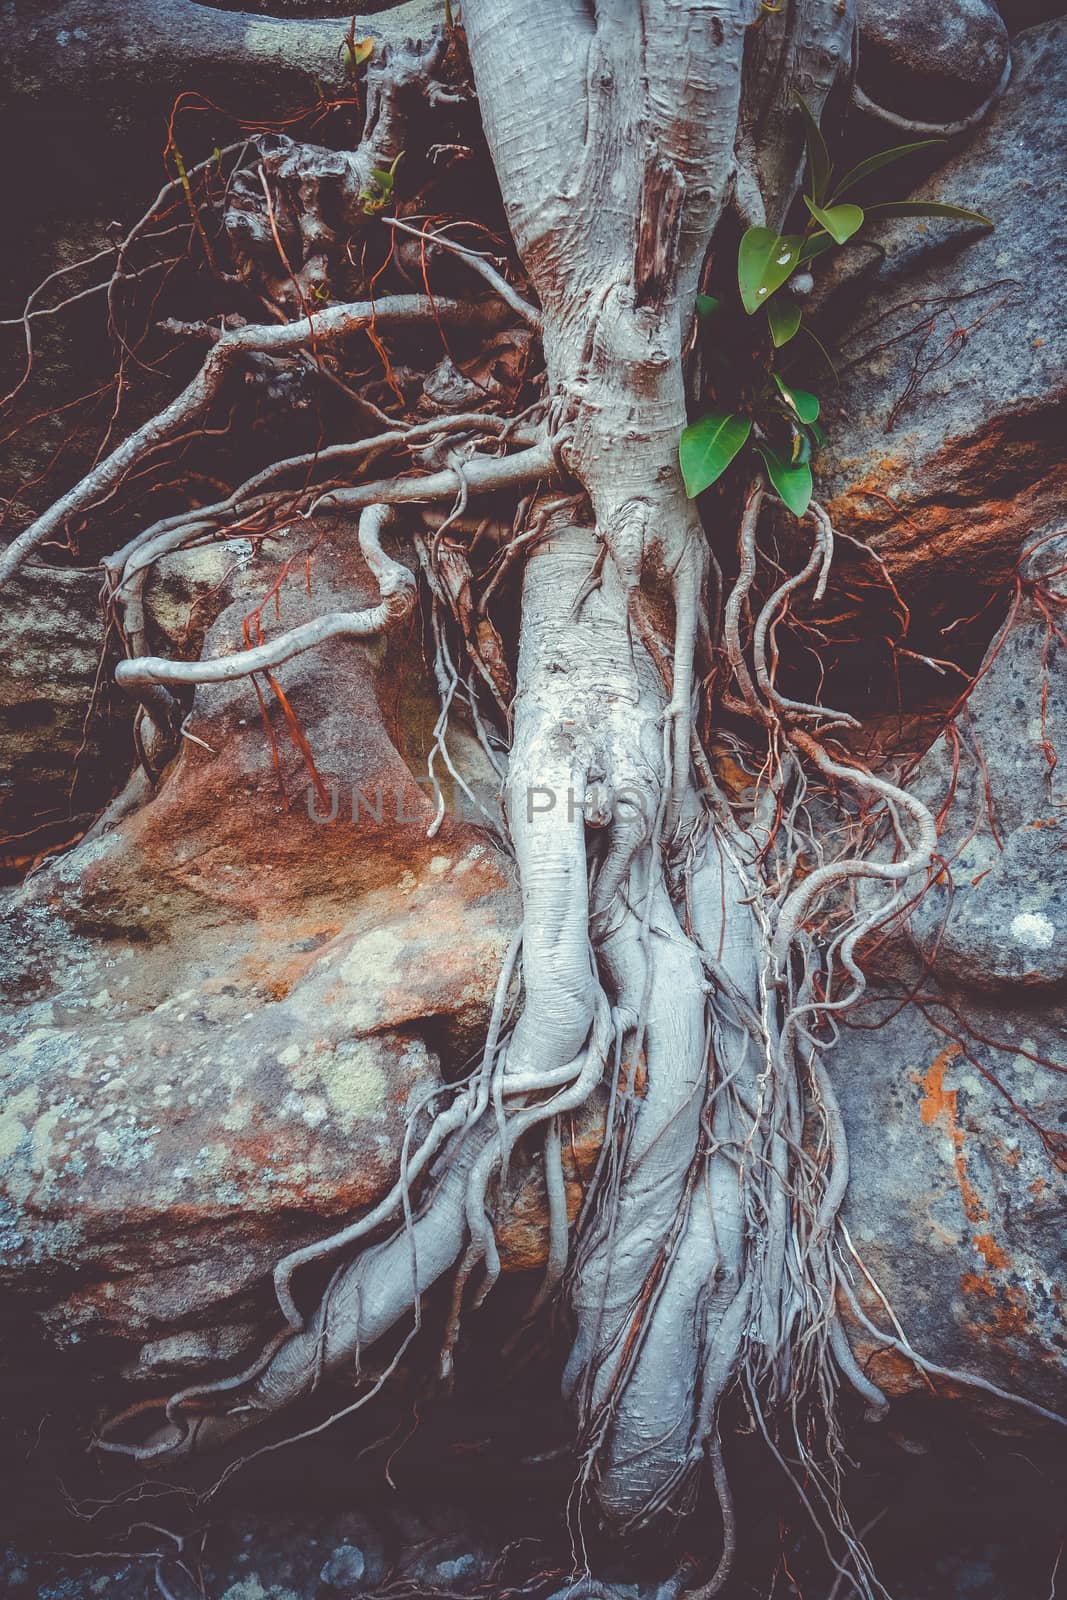 Roots on a rock close-up by daboost